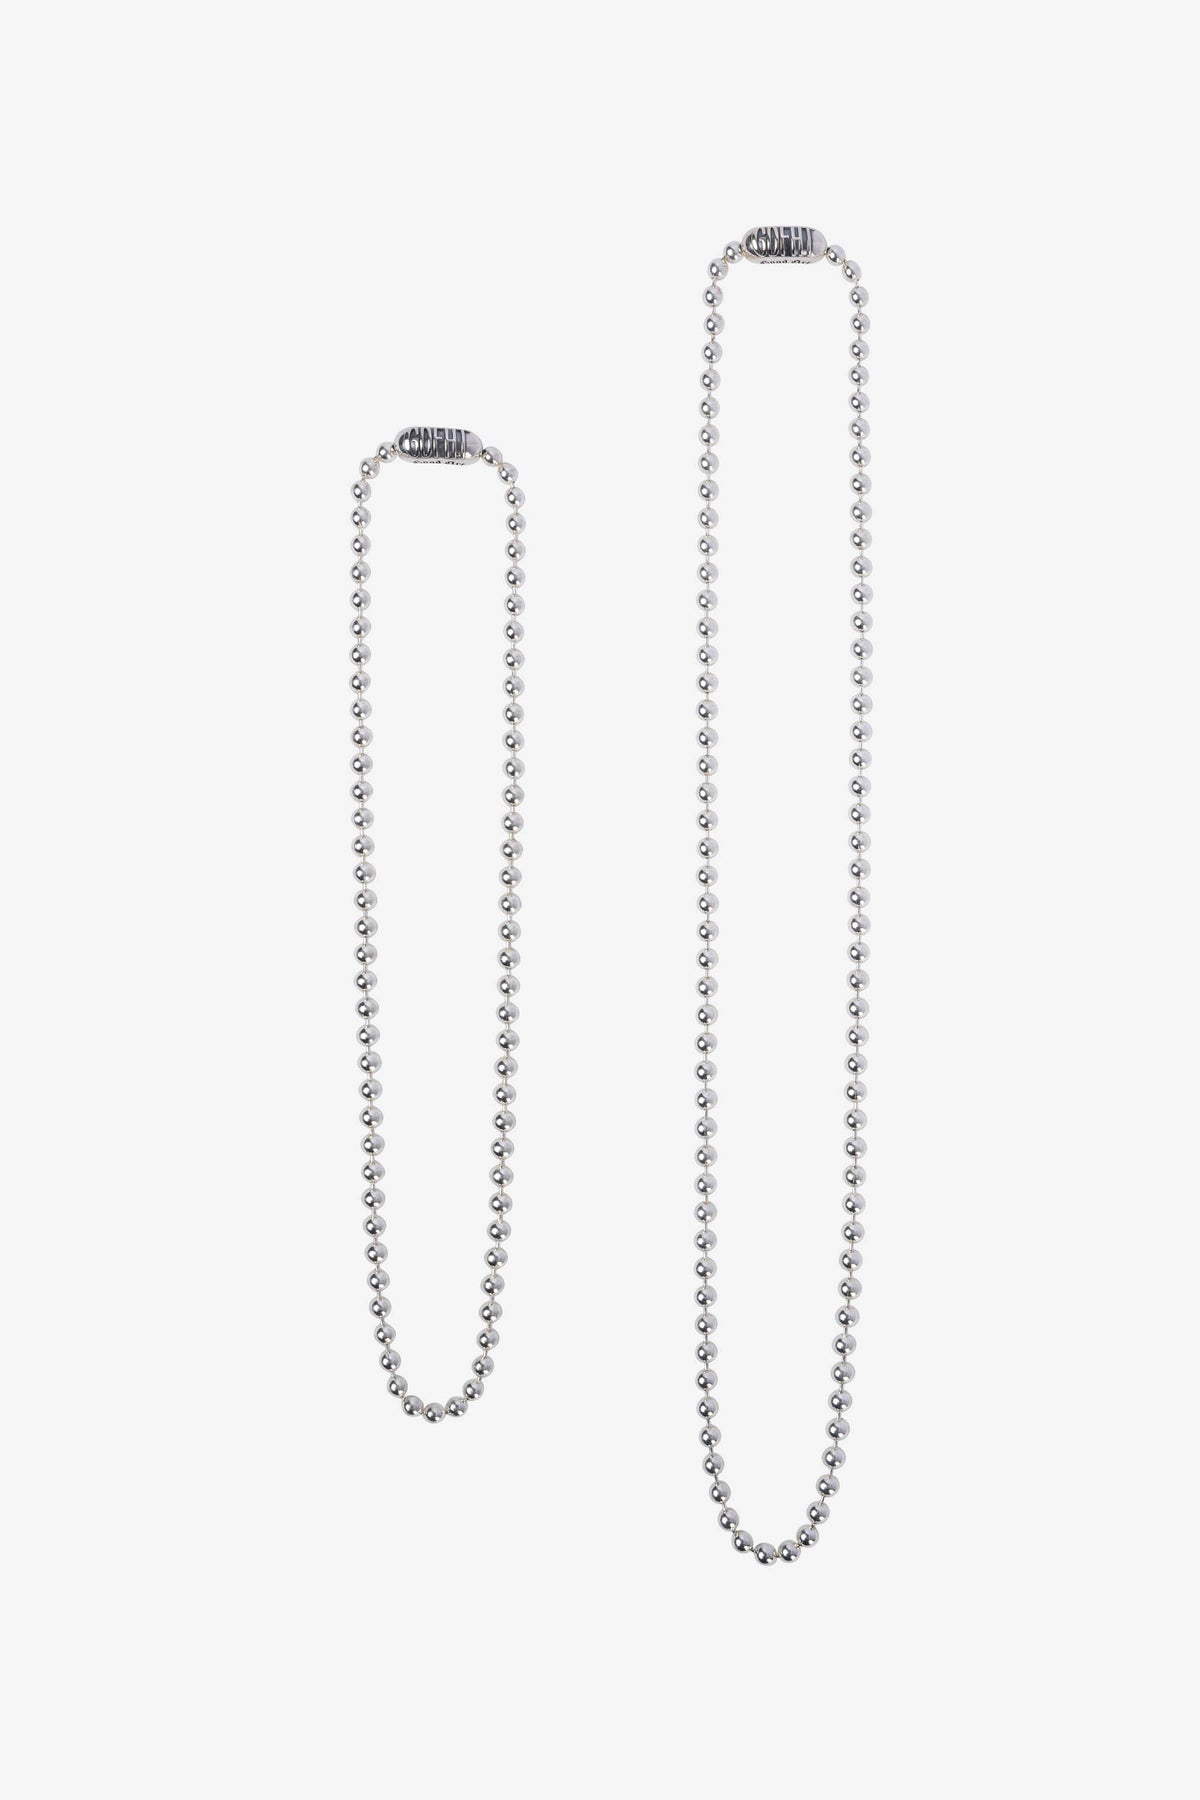 Good Art Hlywd for Goodfight Ball Chain Necklace